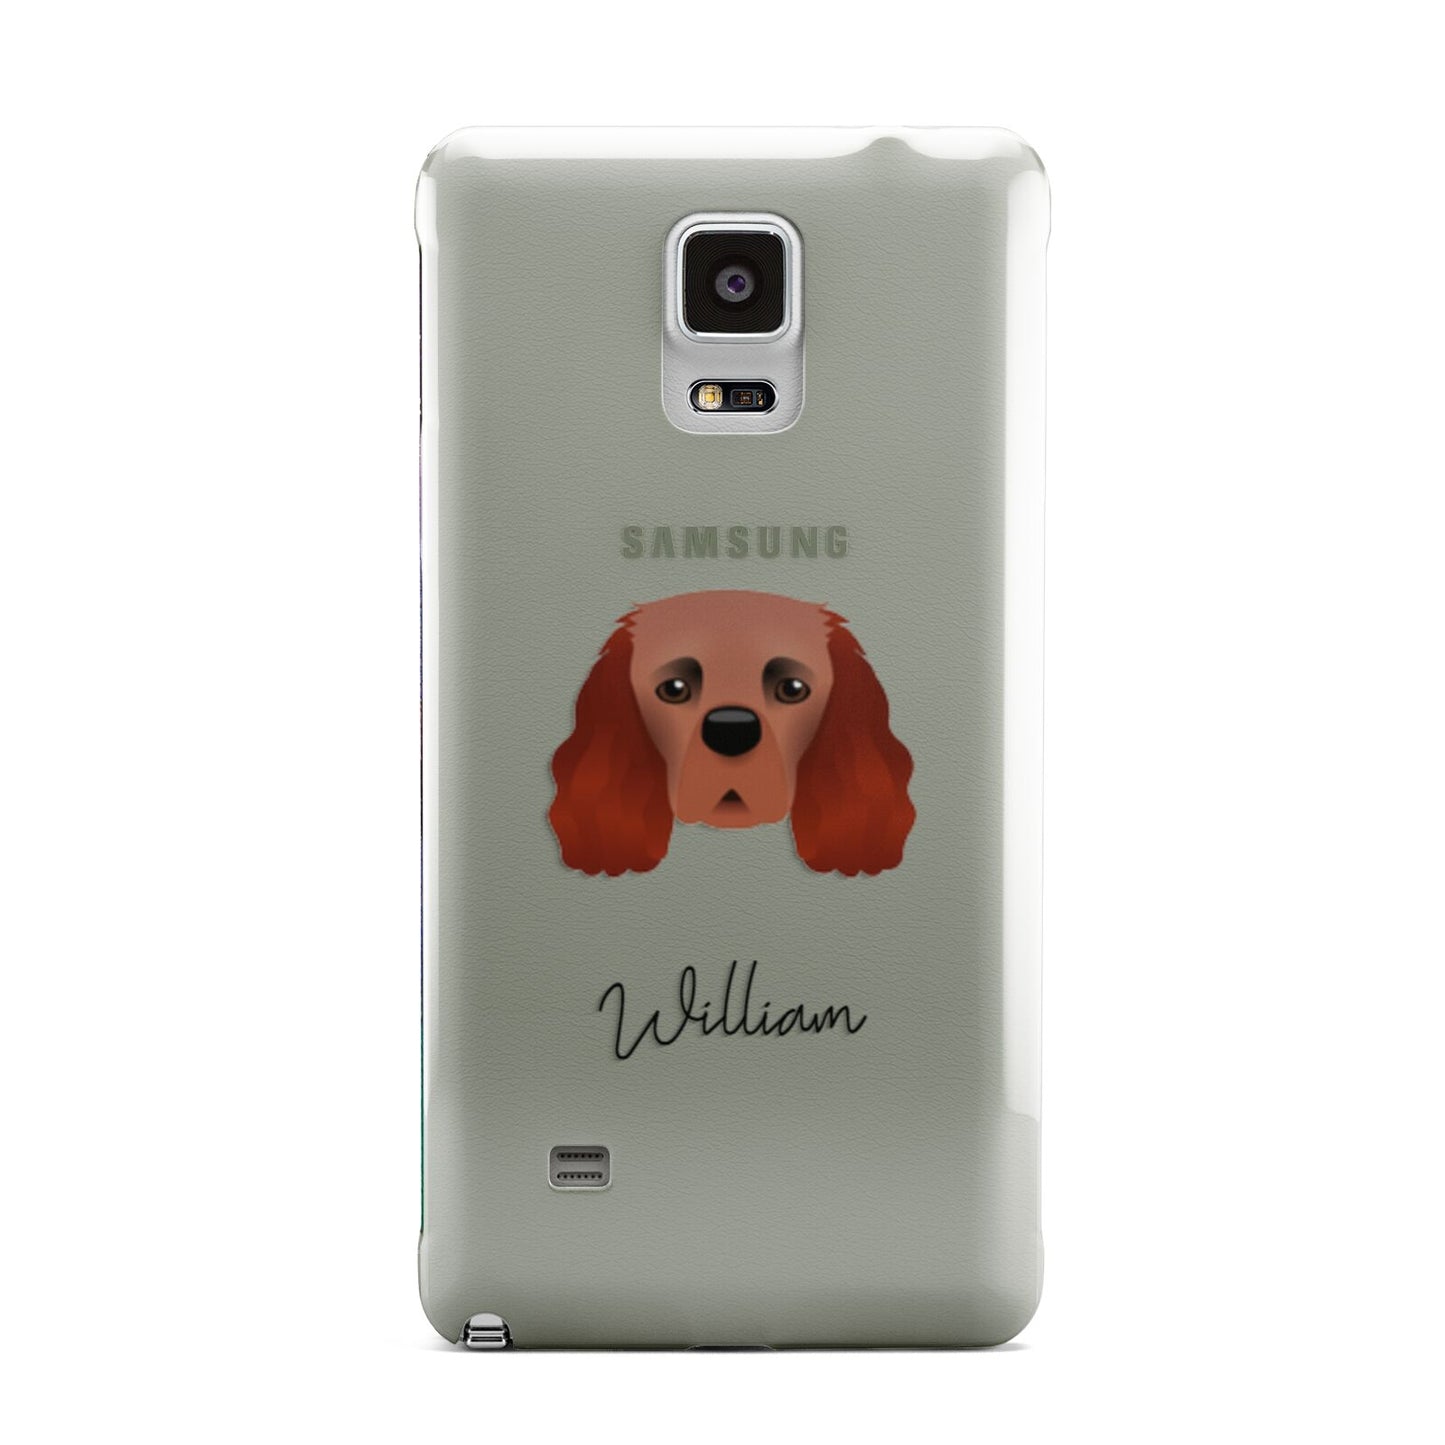 Cavalier King Charles Spaniel Personalised Samsung Galaxy Note 4 Case